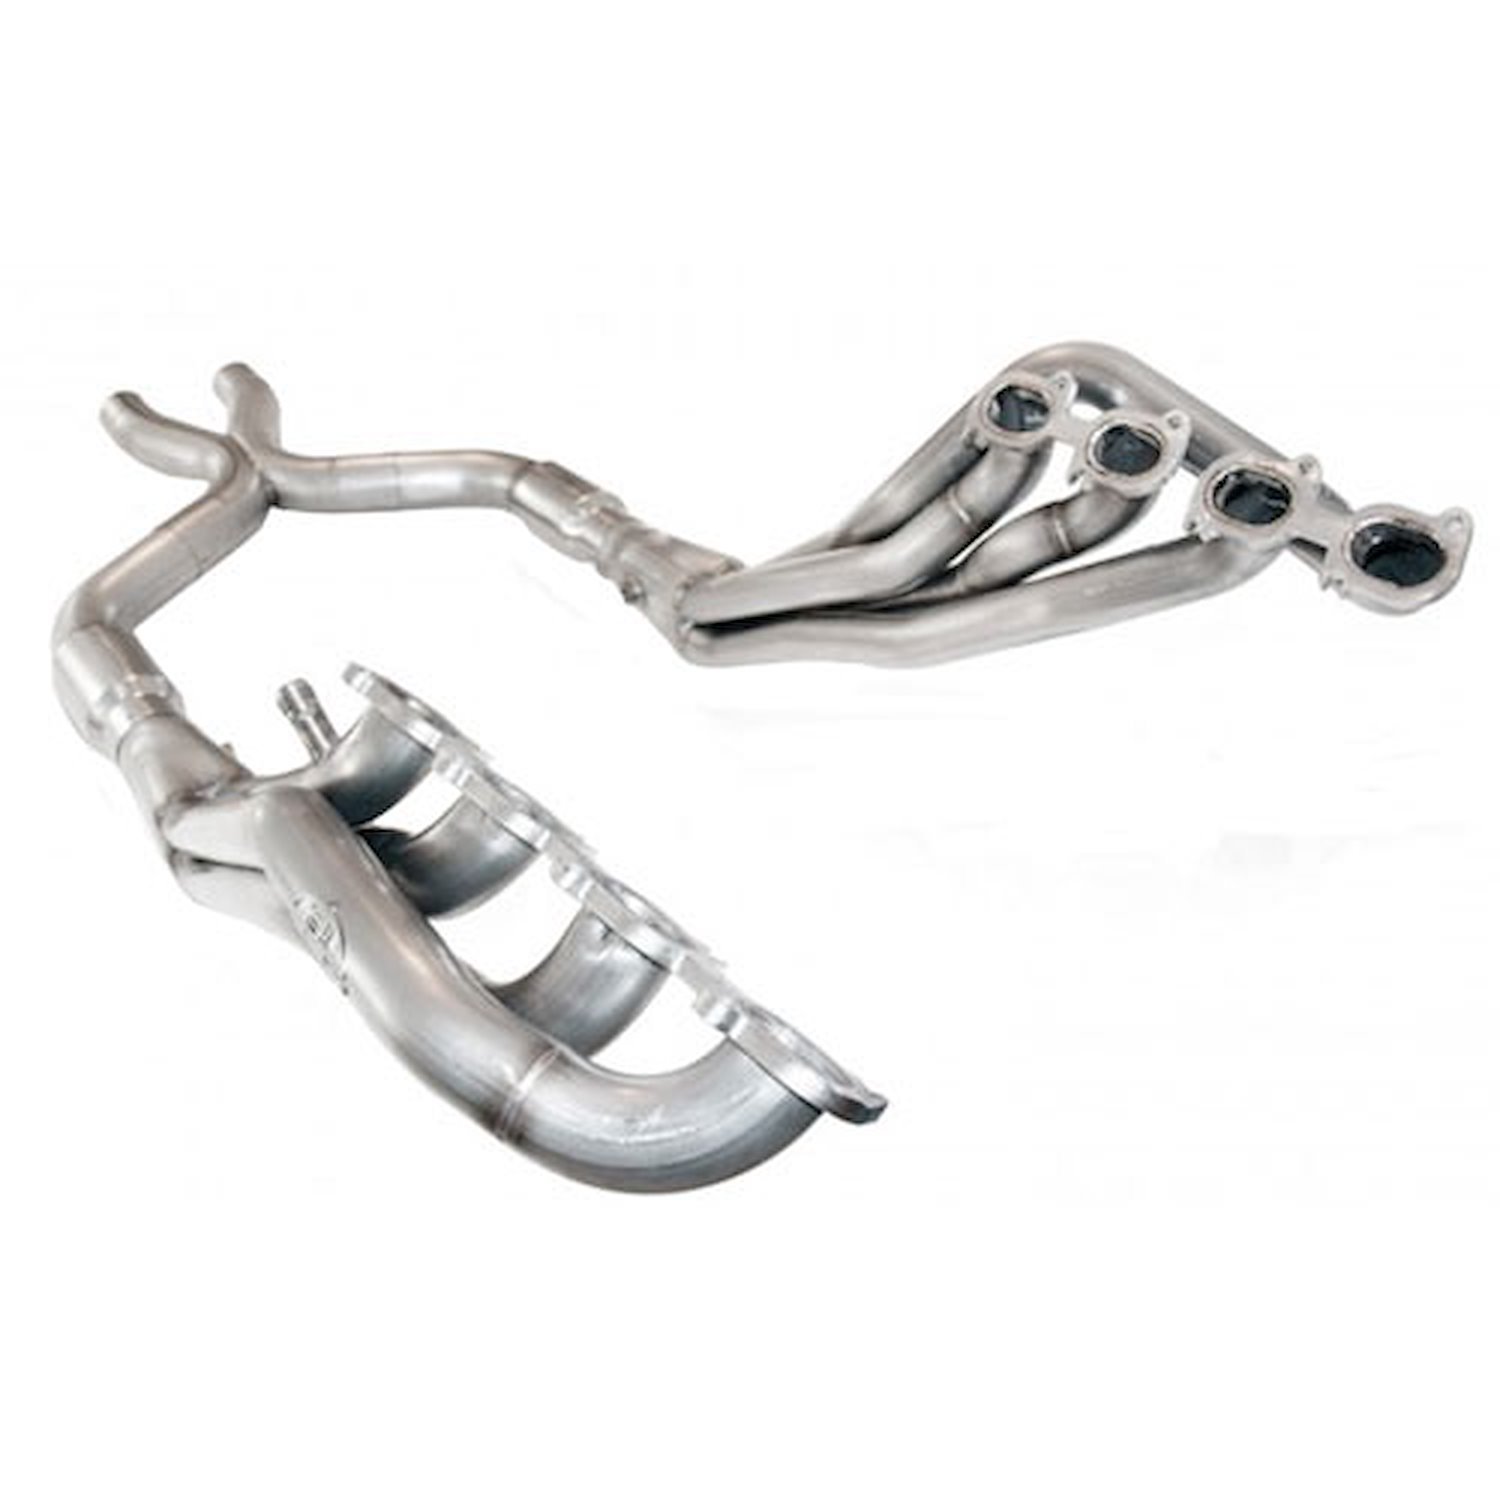 2011-12 Shelby GT500 1 7-8 headers and lead